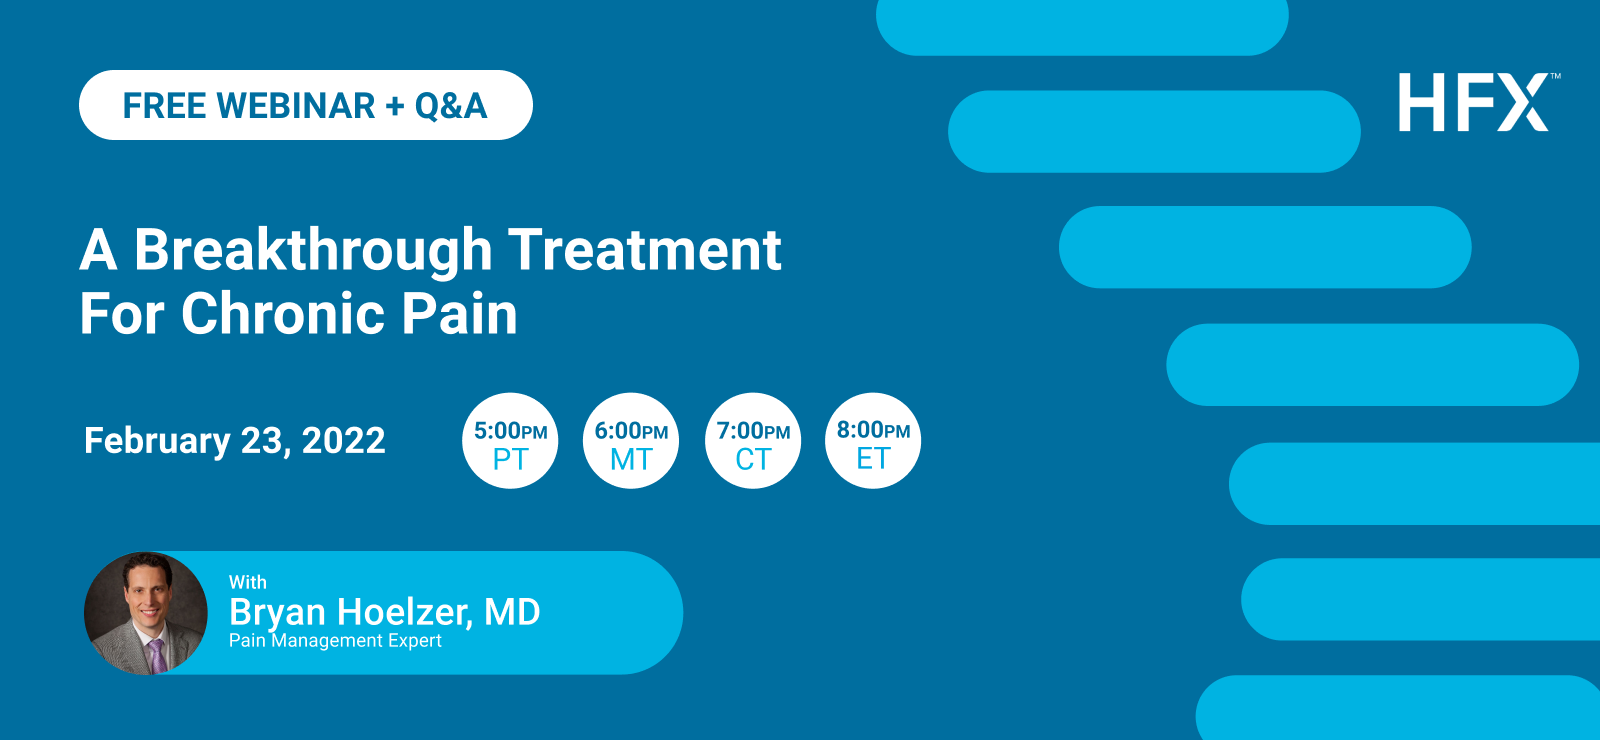 Learn About A Breakthrough Treatment for Chronic Pain